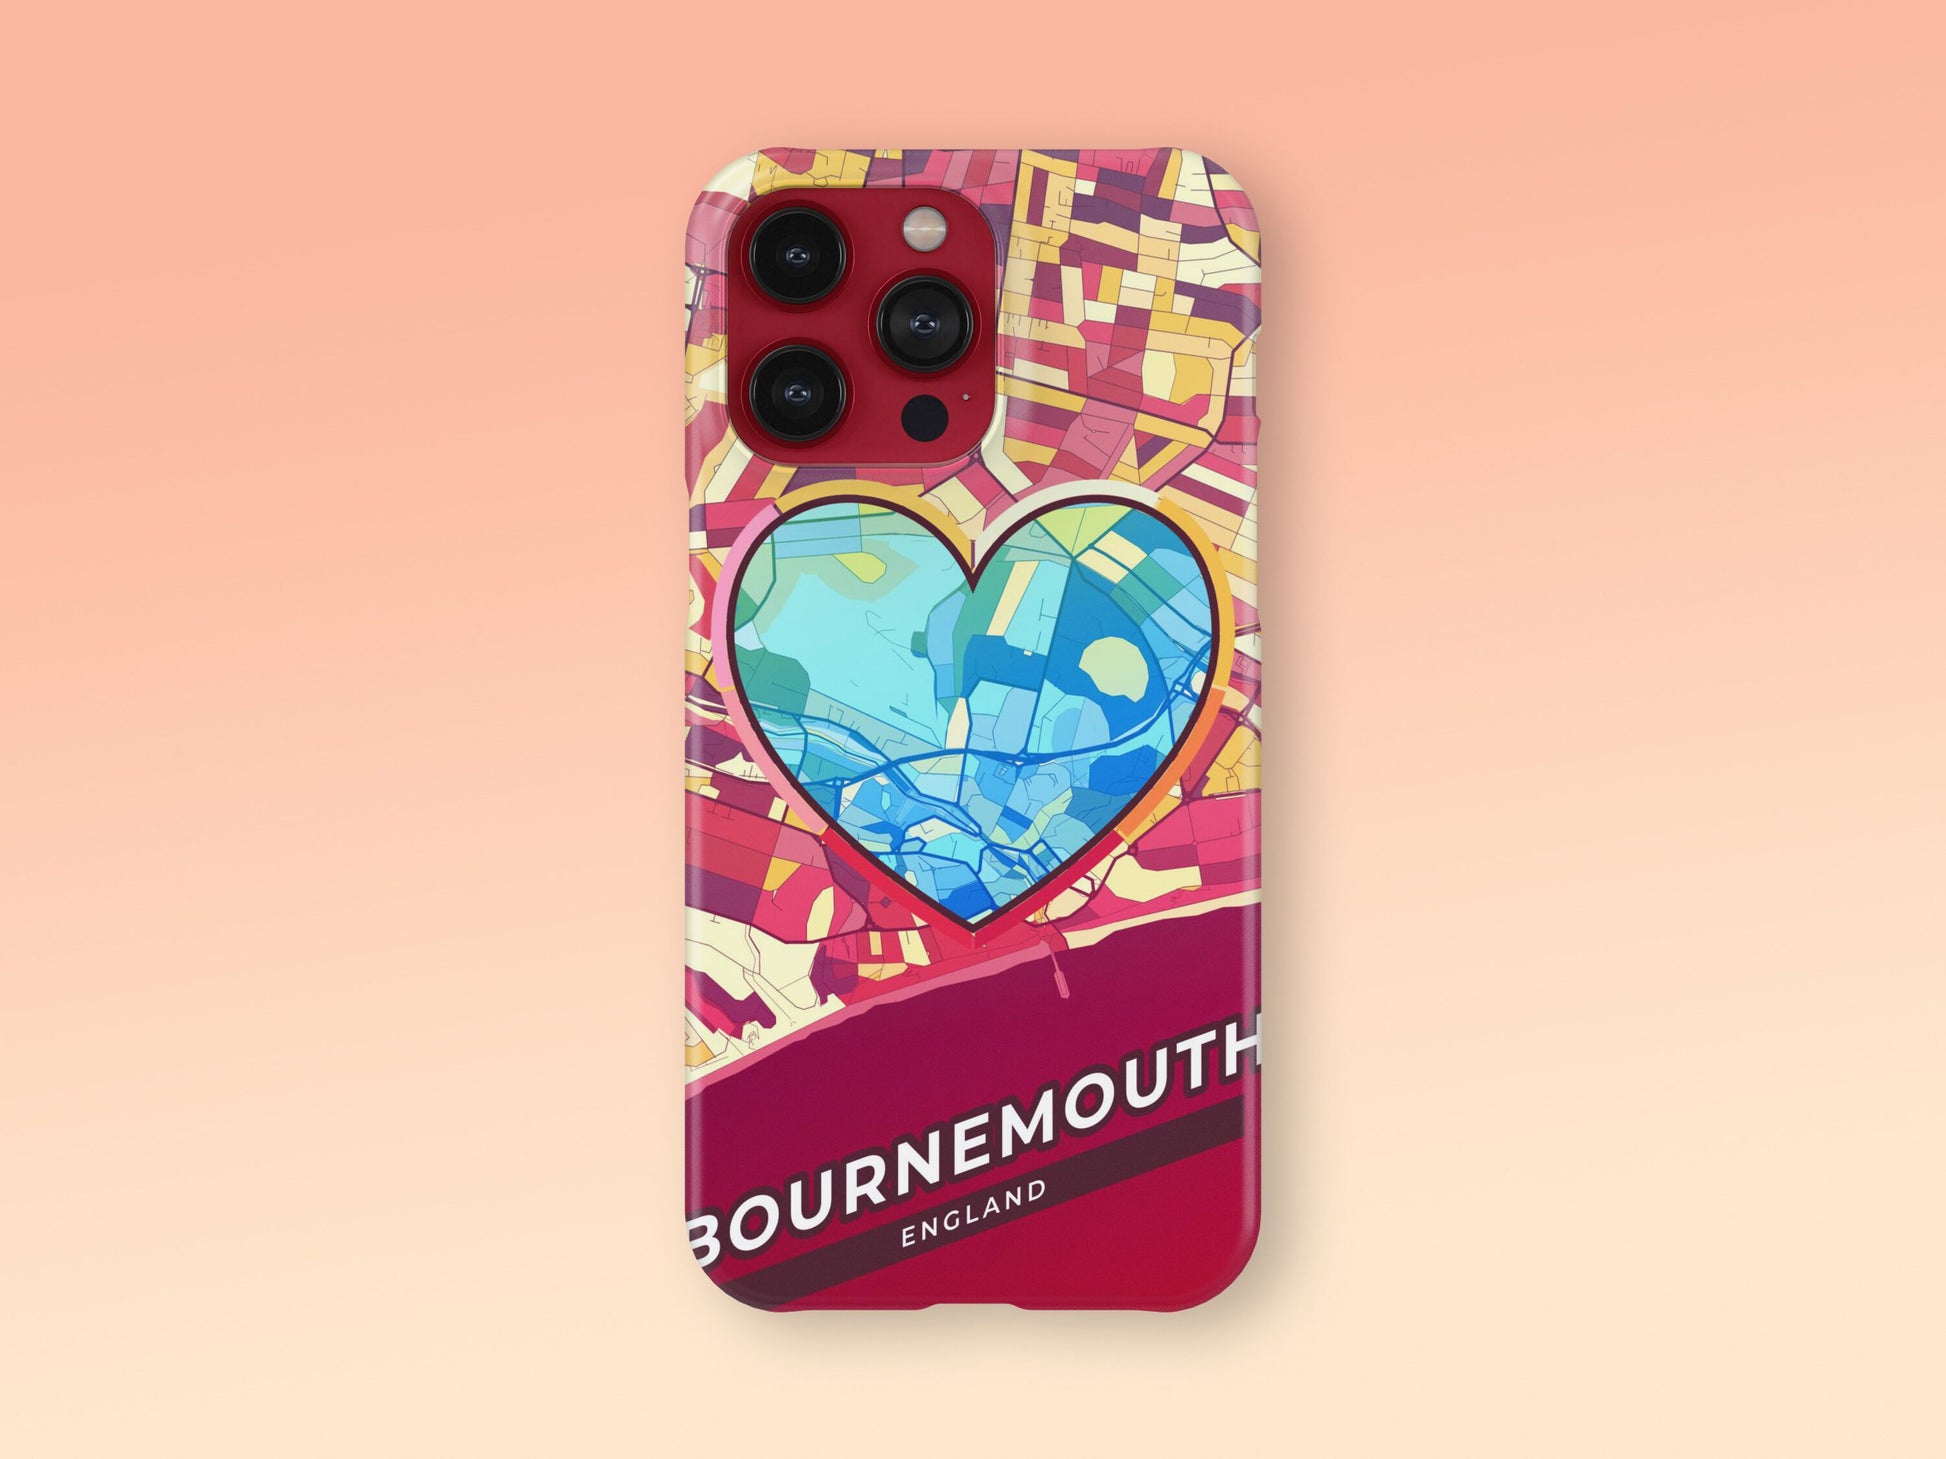 Bournemouth England slim phone case with colorful icon. Birthday, wedding or housewarming gift. Couple match cases. 2